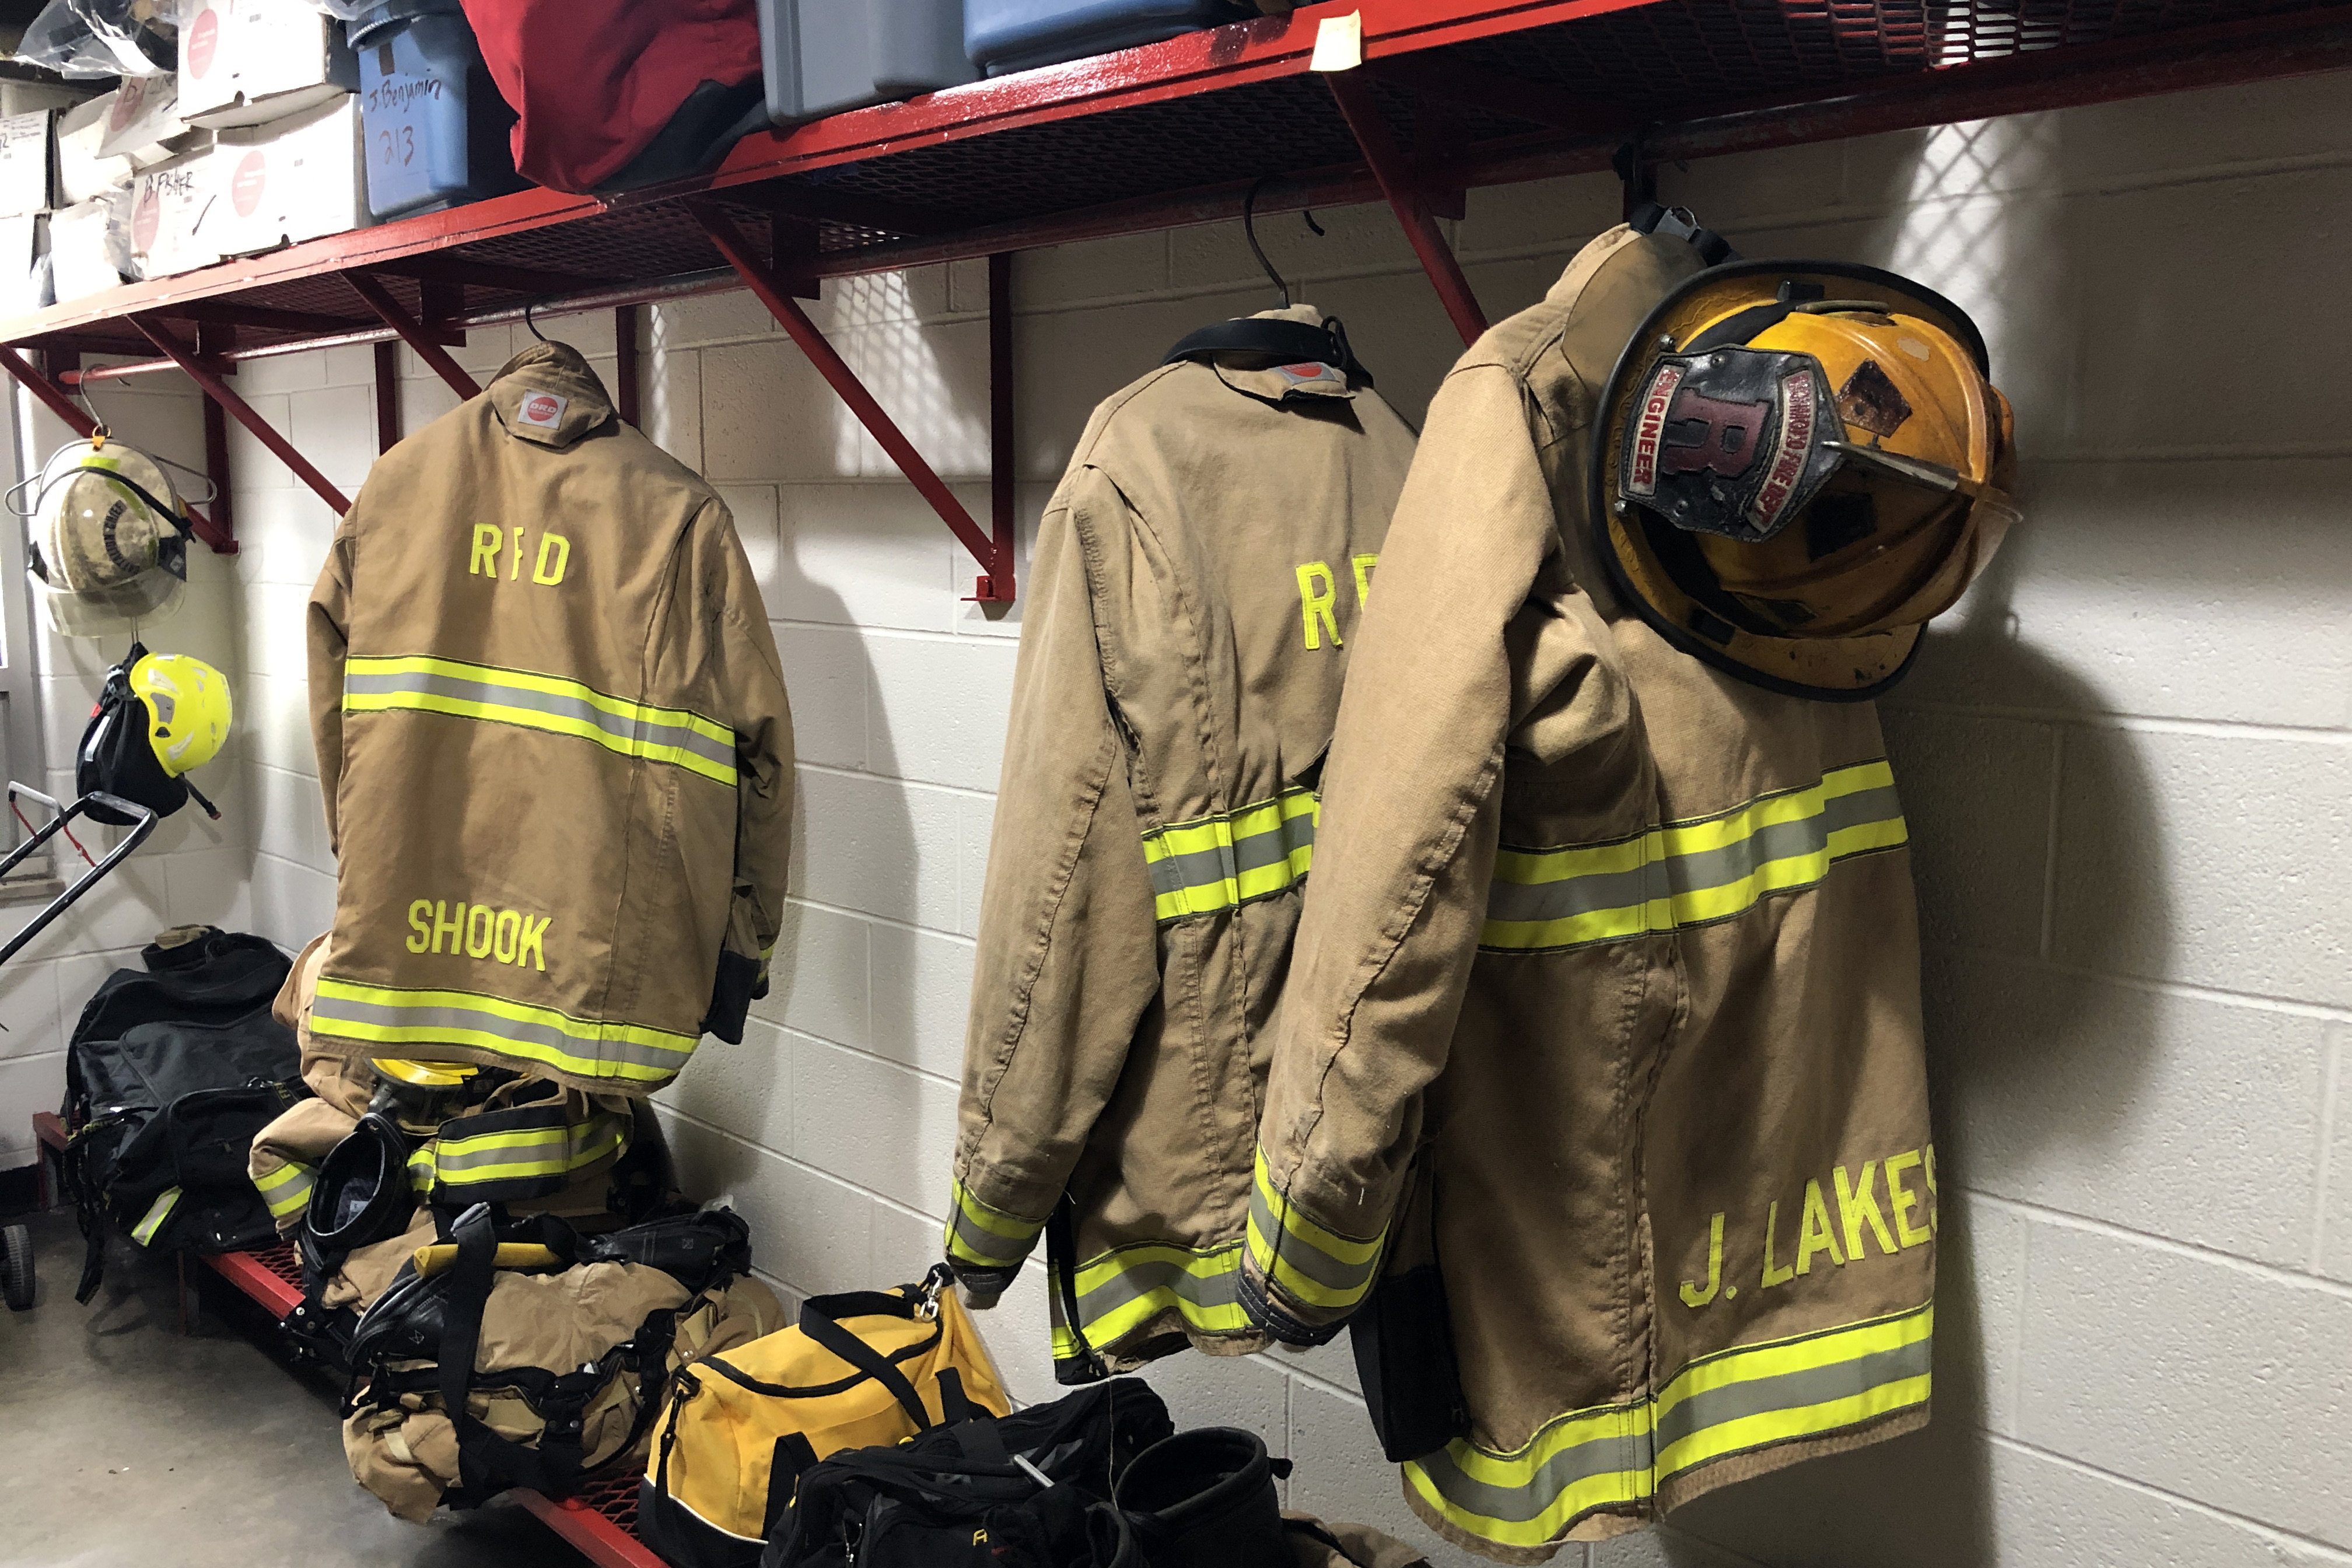 The equipment room at Richmond Fire Department's Central Station sits largely empty as they search for recruits. (Brock Turner WTIU/WFIU News) 